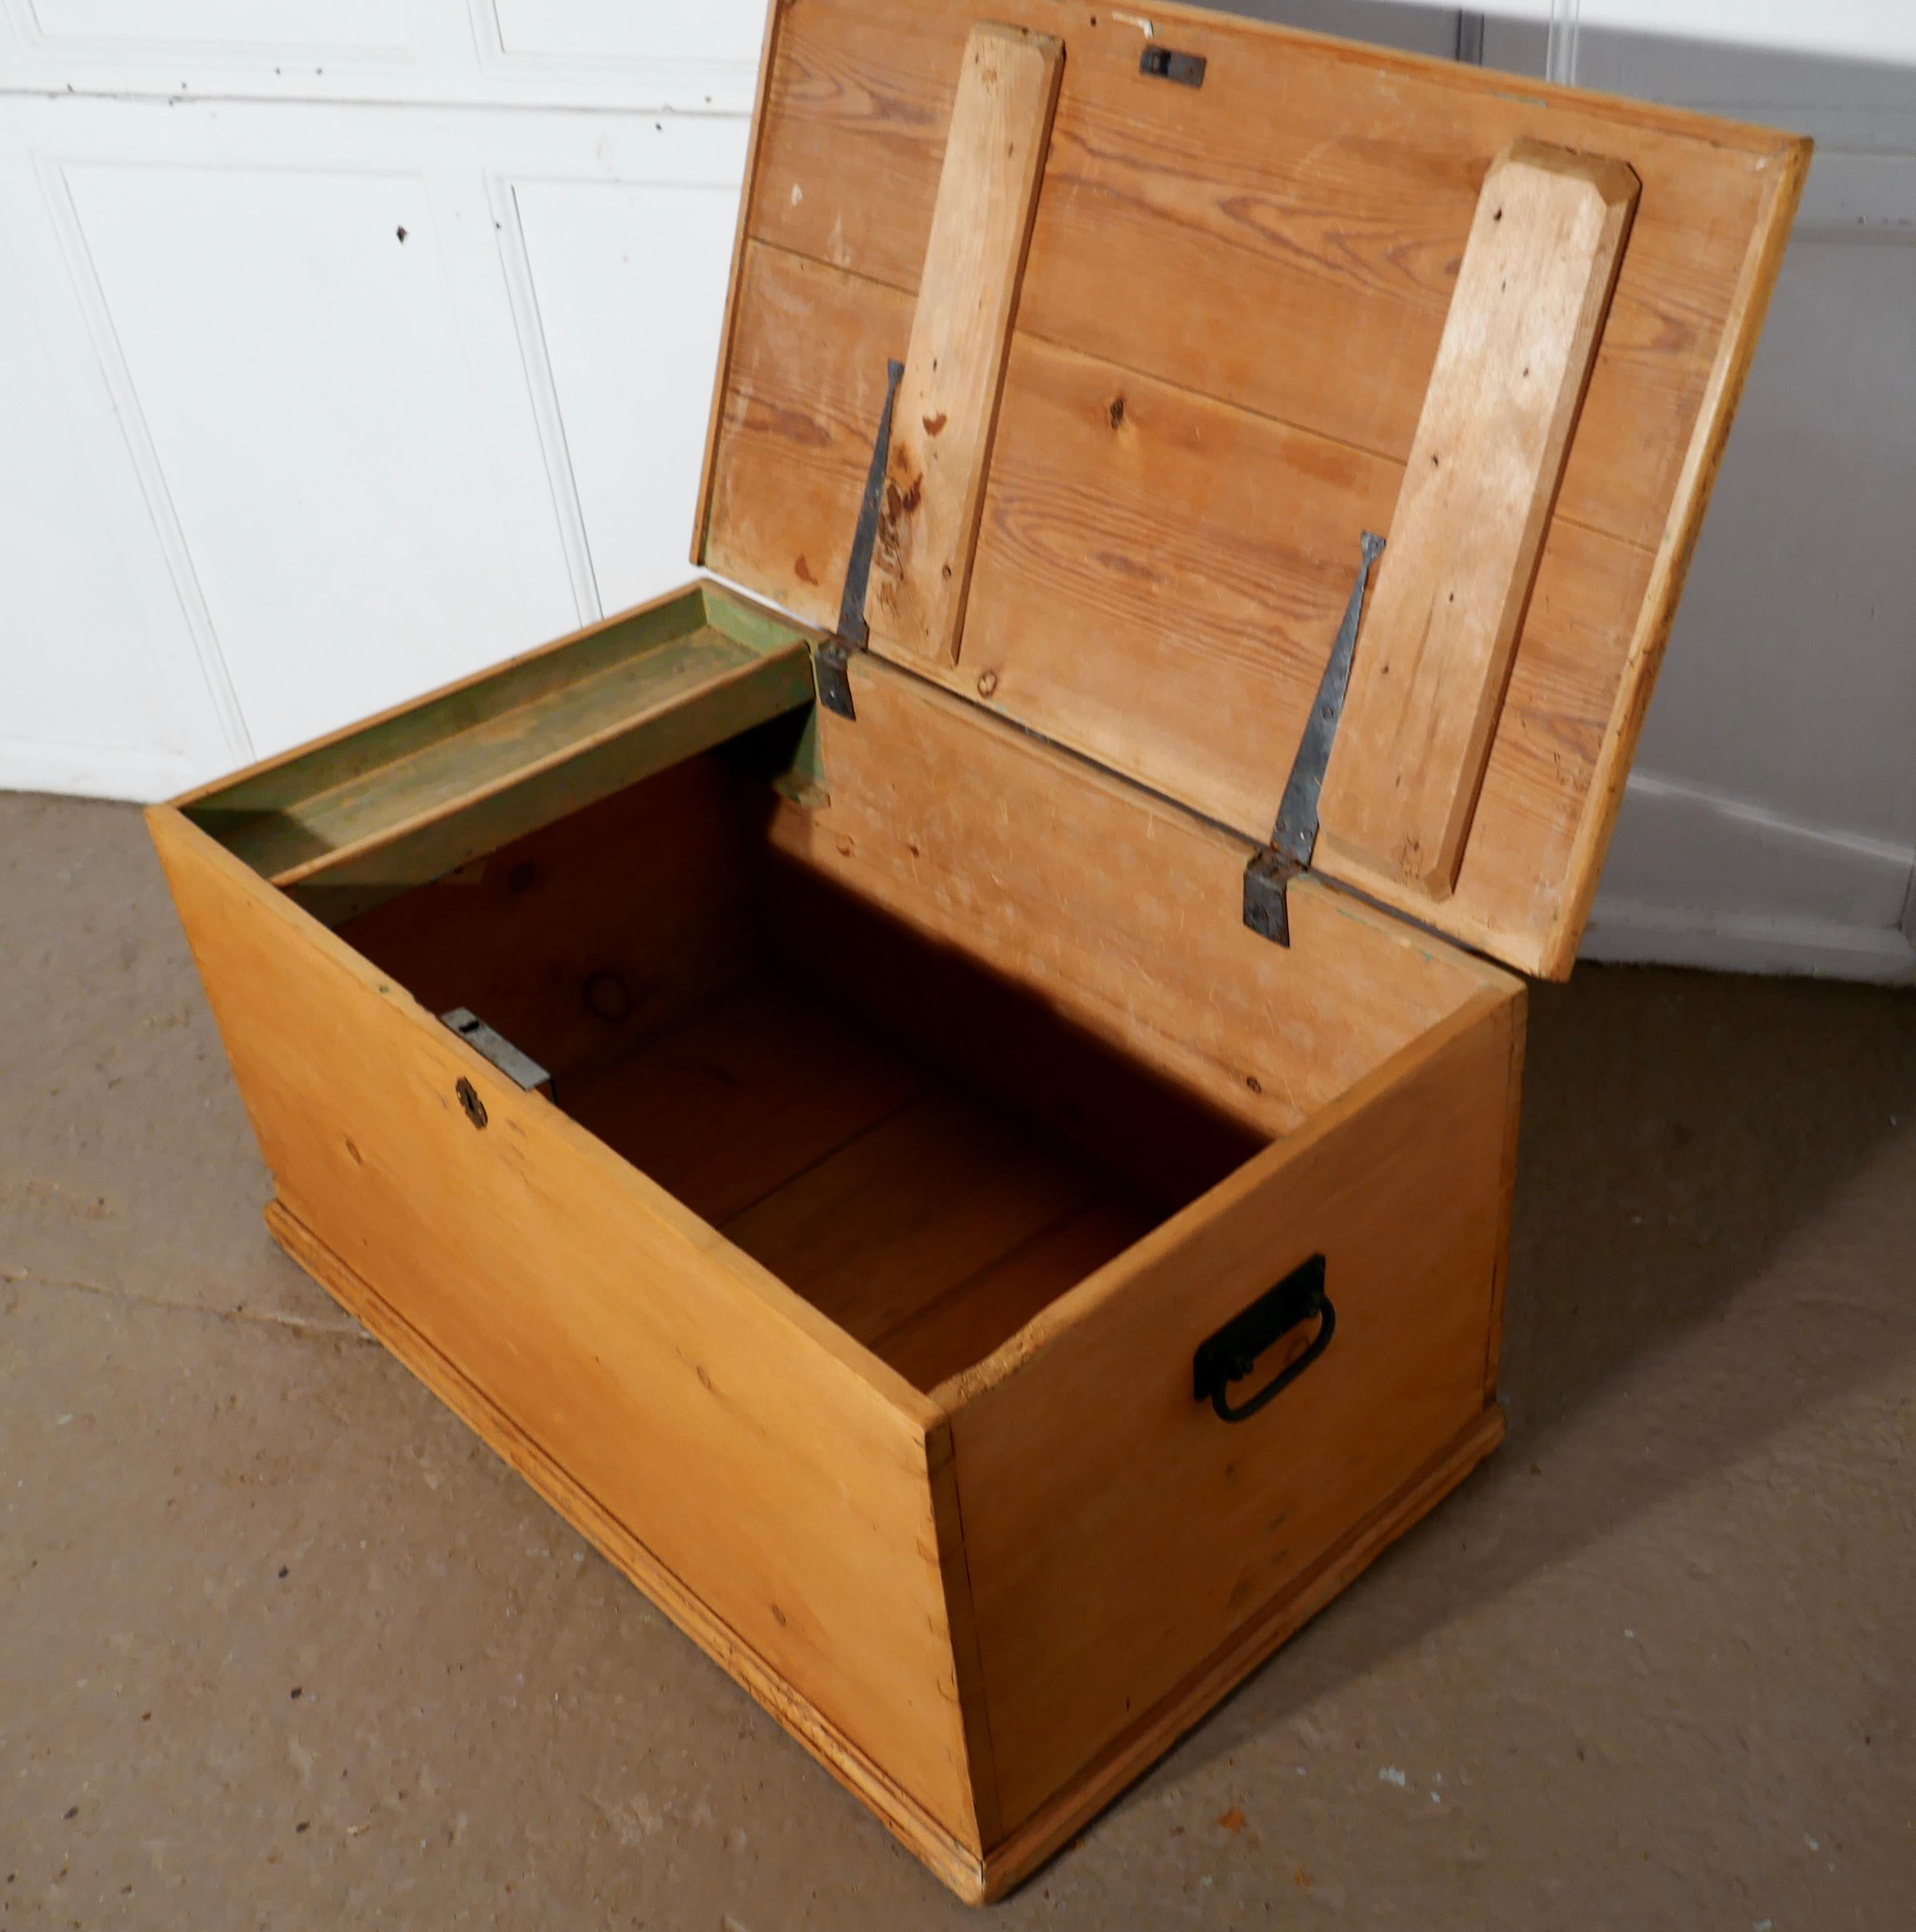 Large Victorian pine blanket box, coffee table or shoe tidy
This is a good quality pine box it has been fully restored, it stands on a small plinth with a moulded edge to the top, it has scandal box to the interior, strap hinges and carving